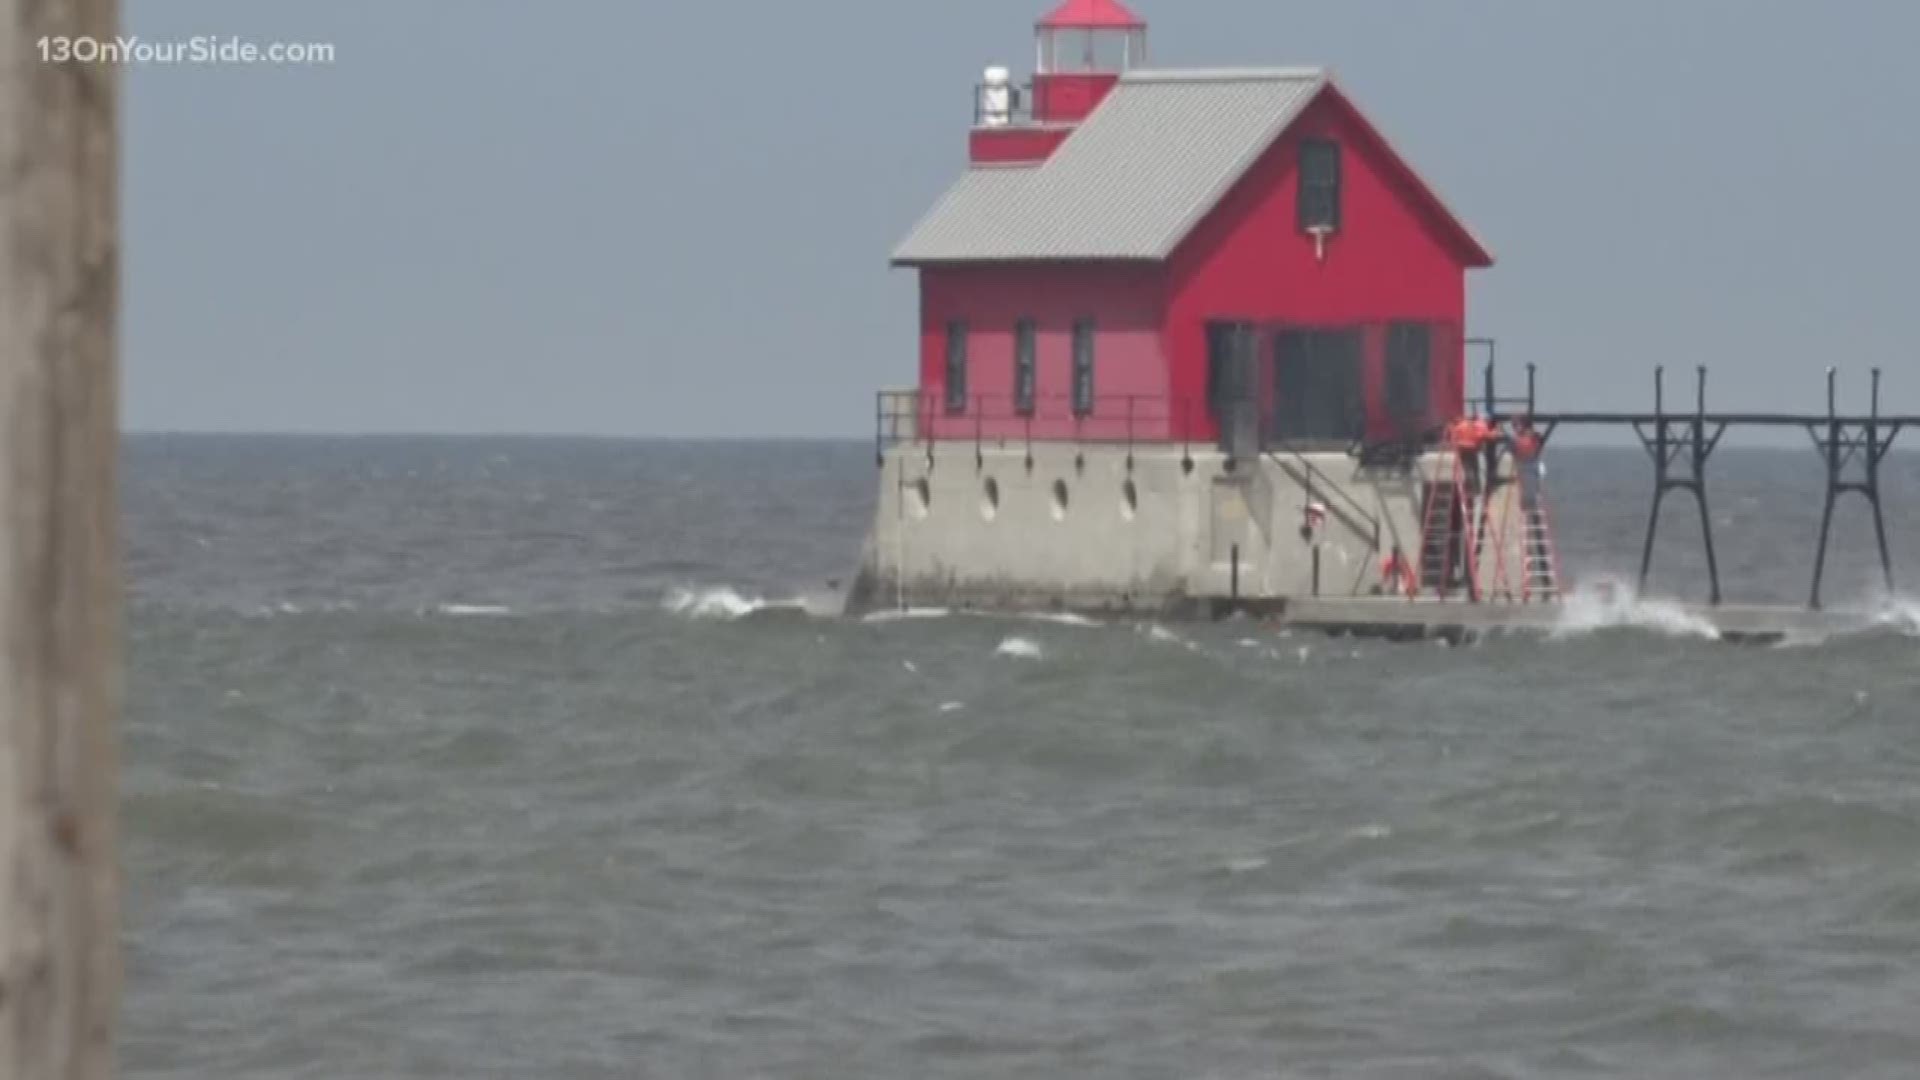 State officials are warning people using Michigan's lakes, rivers and streams to exercise caution due to higher than normal water levels on many of them. Crews are noticing an increase in flooding on docks and piers that have electrical connections, which could cause electric shock drowning.